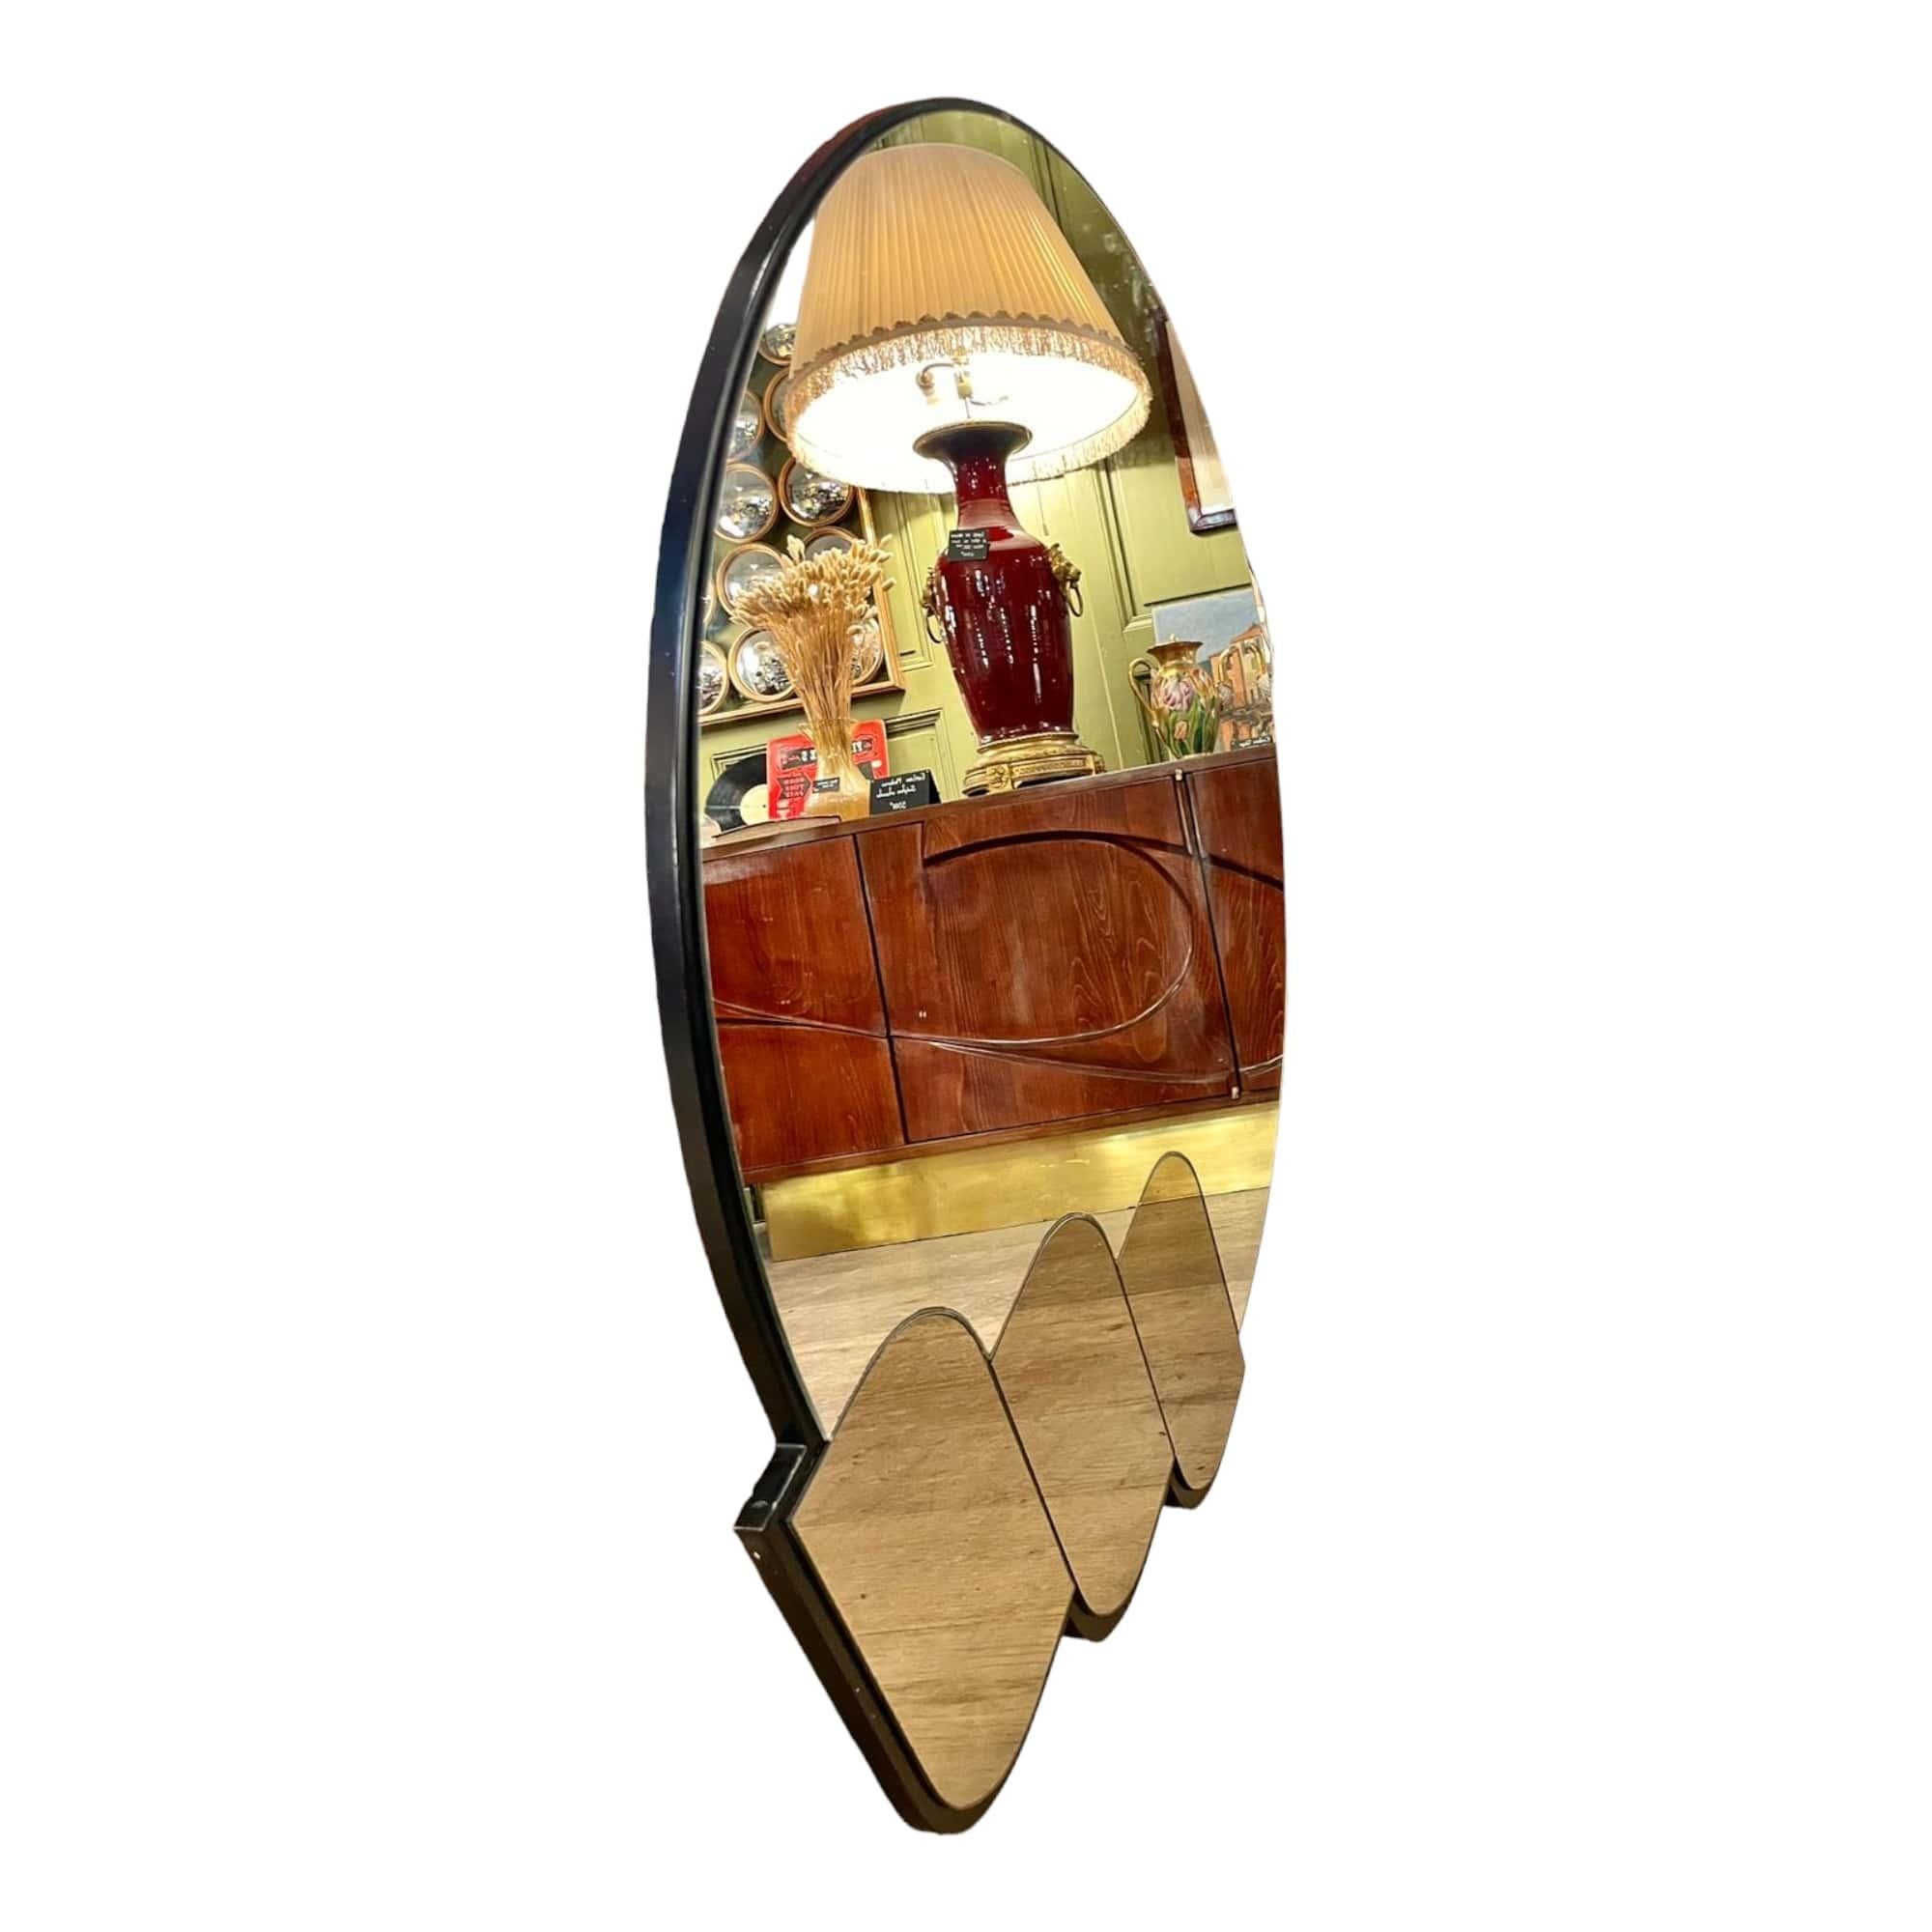 This magnificent retro mirror from the 80s is a true piece of French antique, dating from 1980. Its unique design and retro style make it an exceptional decorative object for any room in the house. The careful details and quality of manufacturing